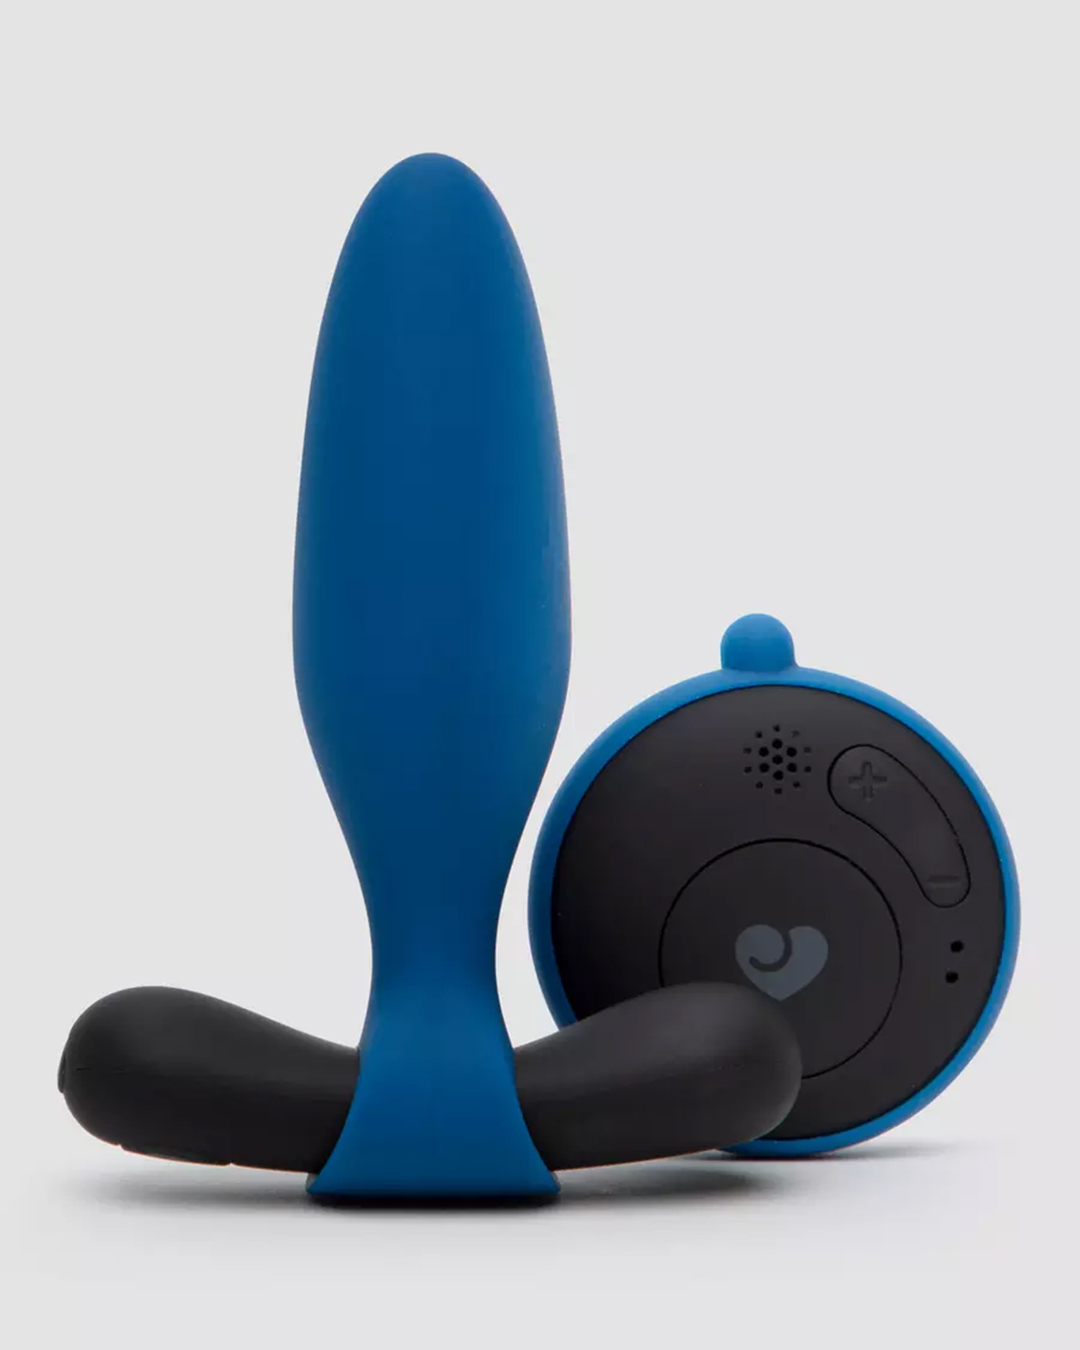 Lovehoney Juno Rechargeable Music-Activated Vibrating Butt Plug